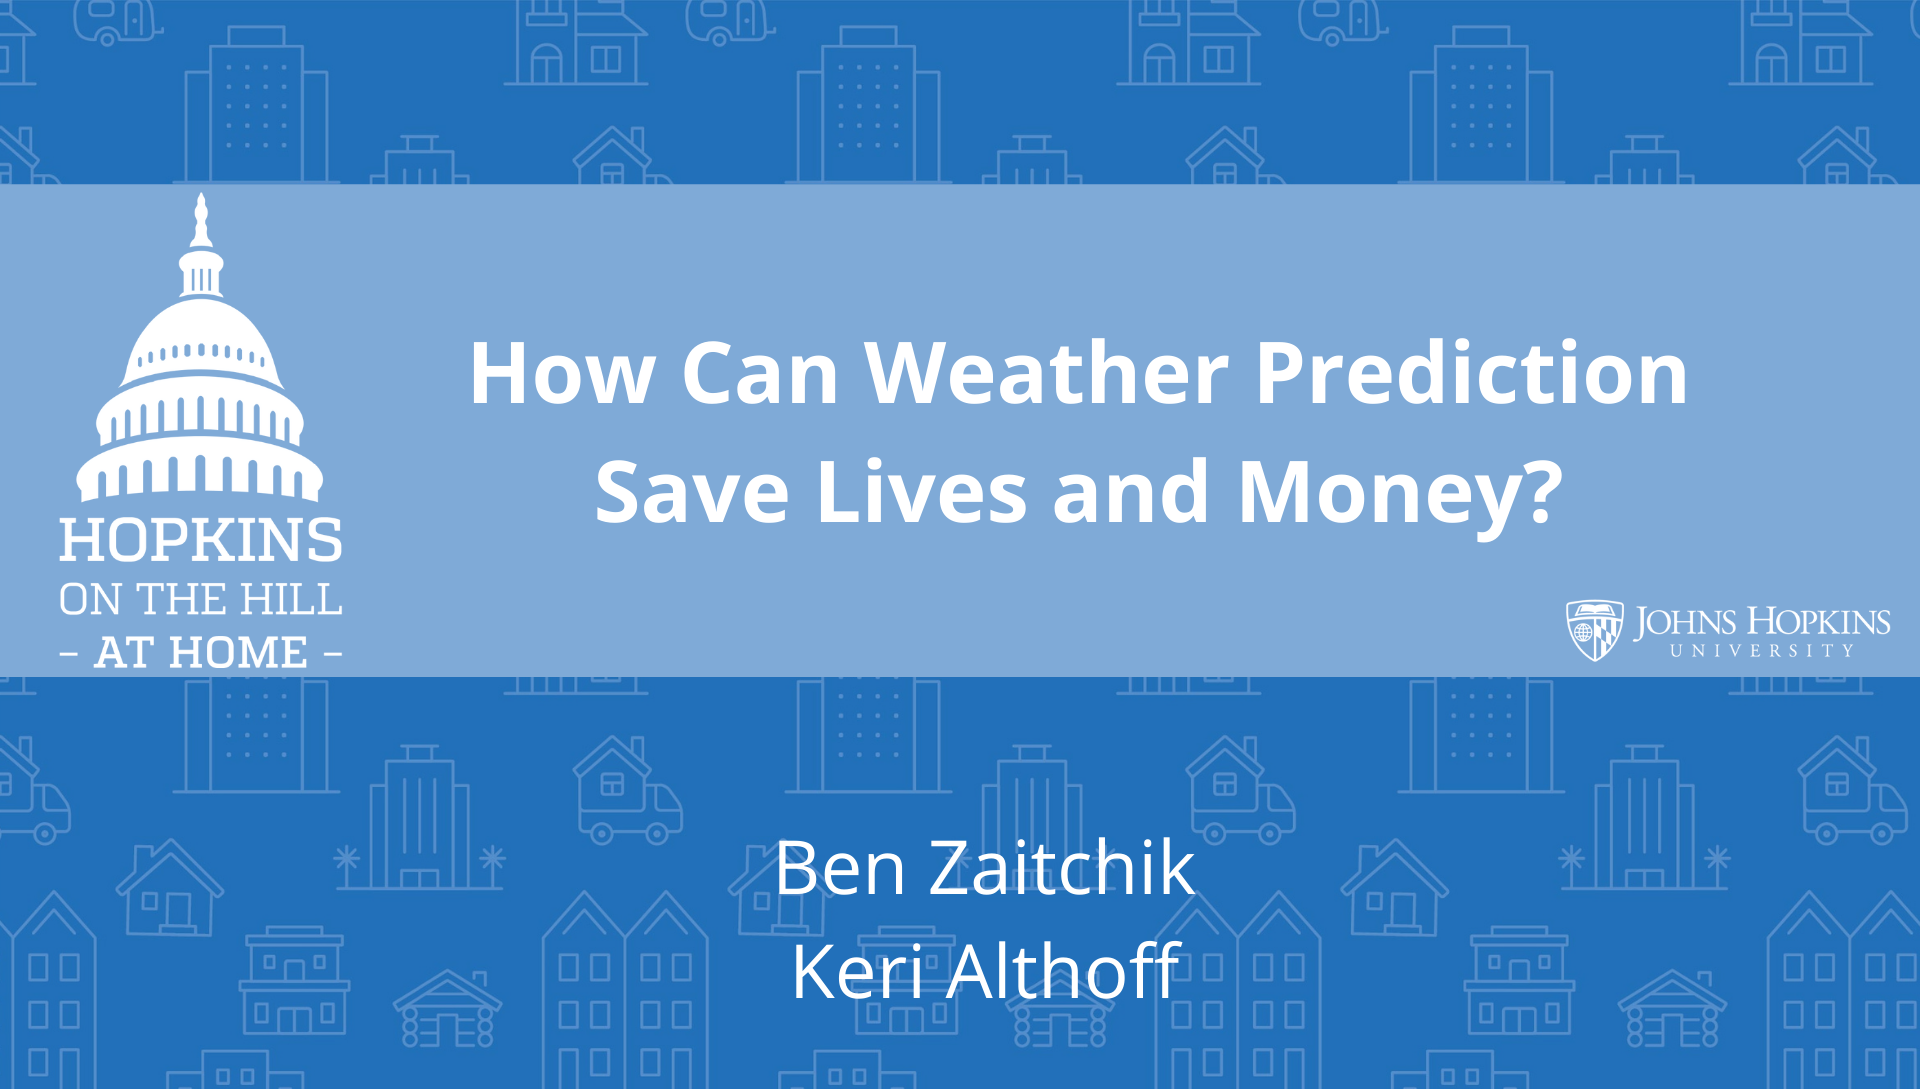 Solid blue background featuring line drawings of various types of homes with text reading “How can weather predictions save lives and money?” and names listed below: Ben Zaitchik, Keri Althoff. On the left the Hopkins on the Hill at Home logo featuring the Capitol Dome. On the right, the Johns Hopkins University logo. 